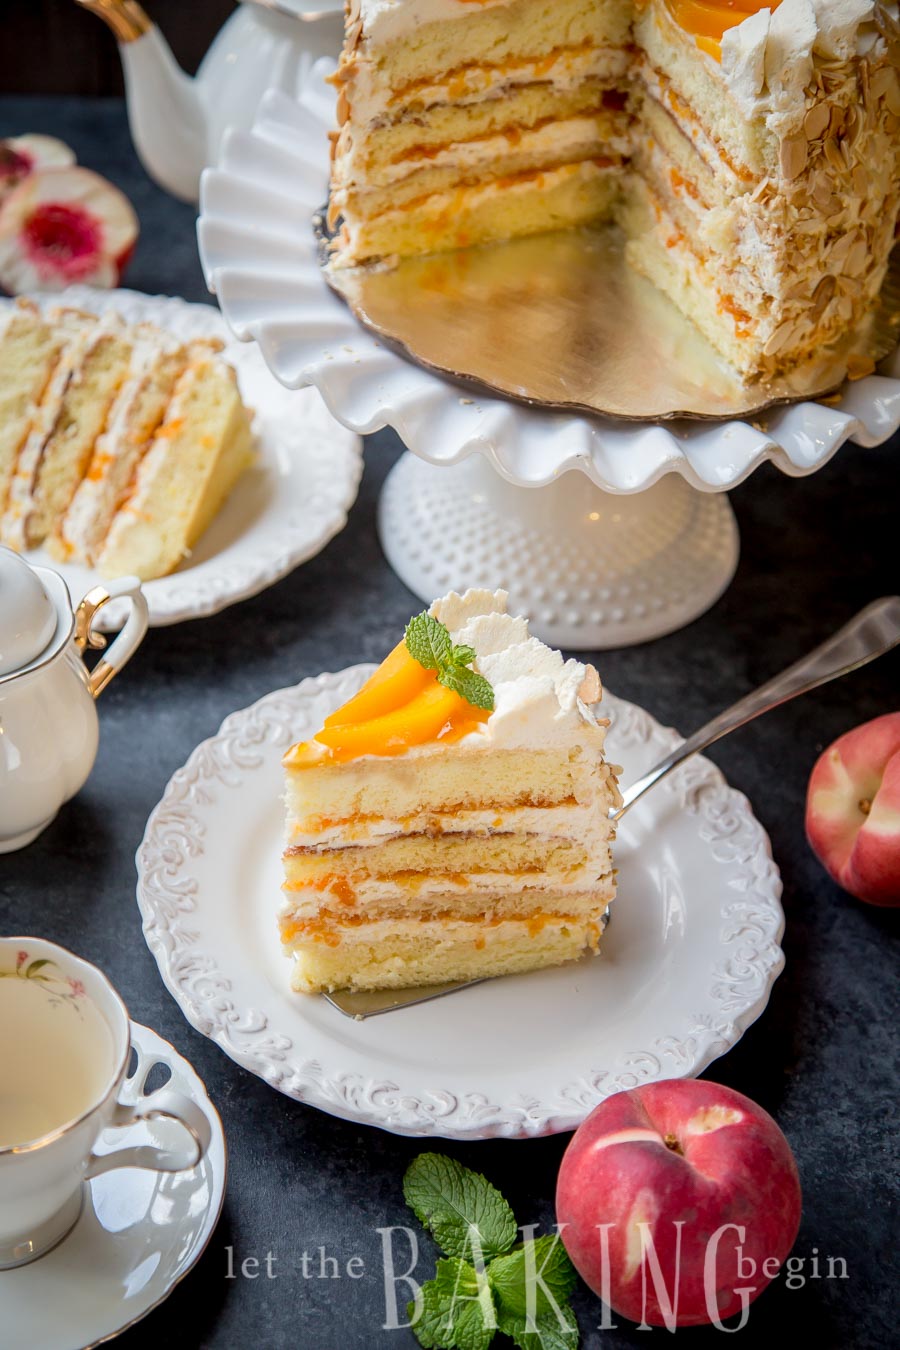 A slice of peached and cream cake on a plate next to a teacup and peaches. 